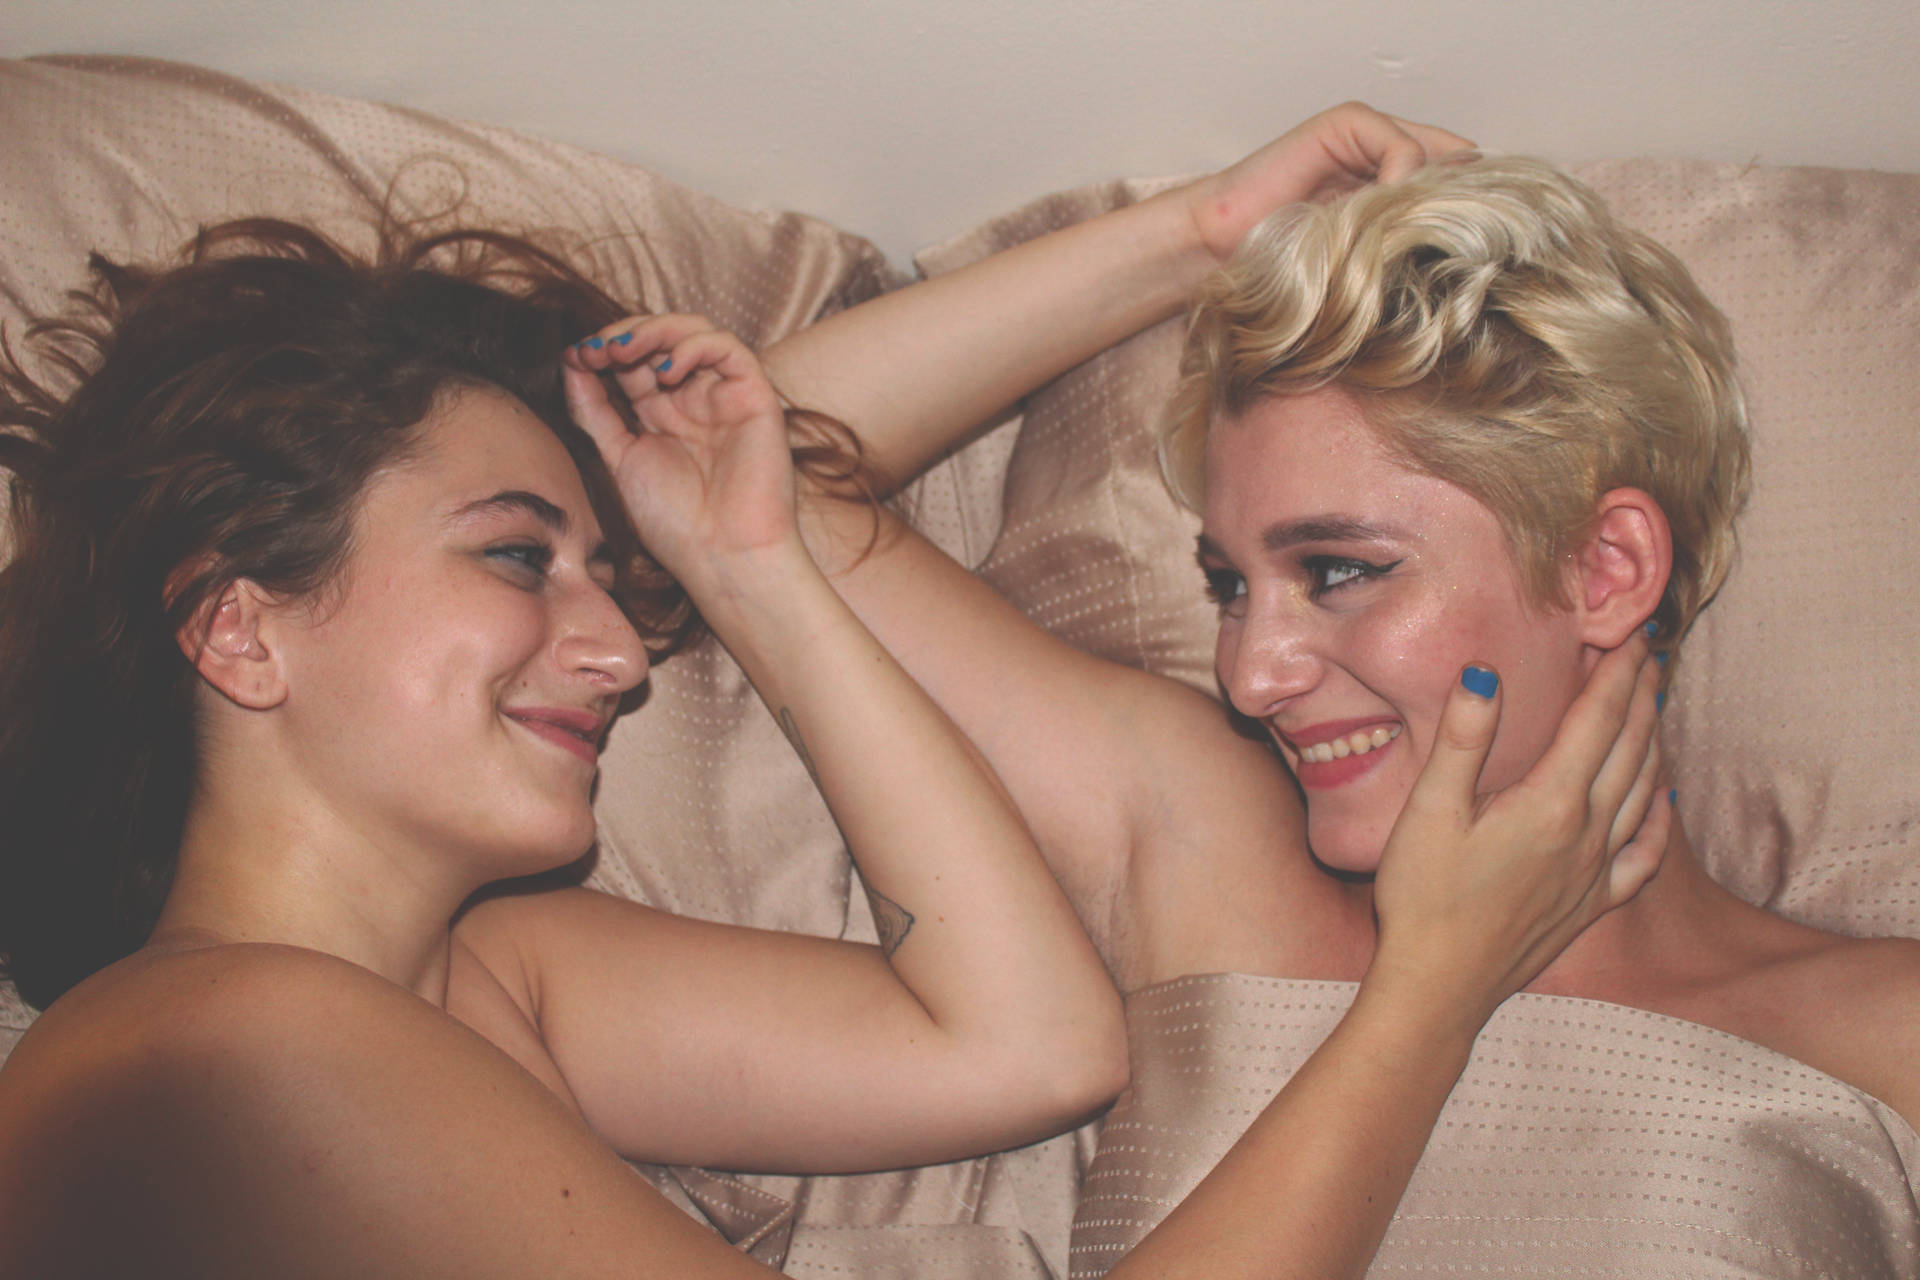 Lesbian Couple On Bed Wallpaper